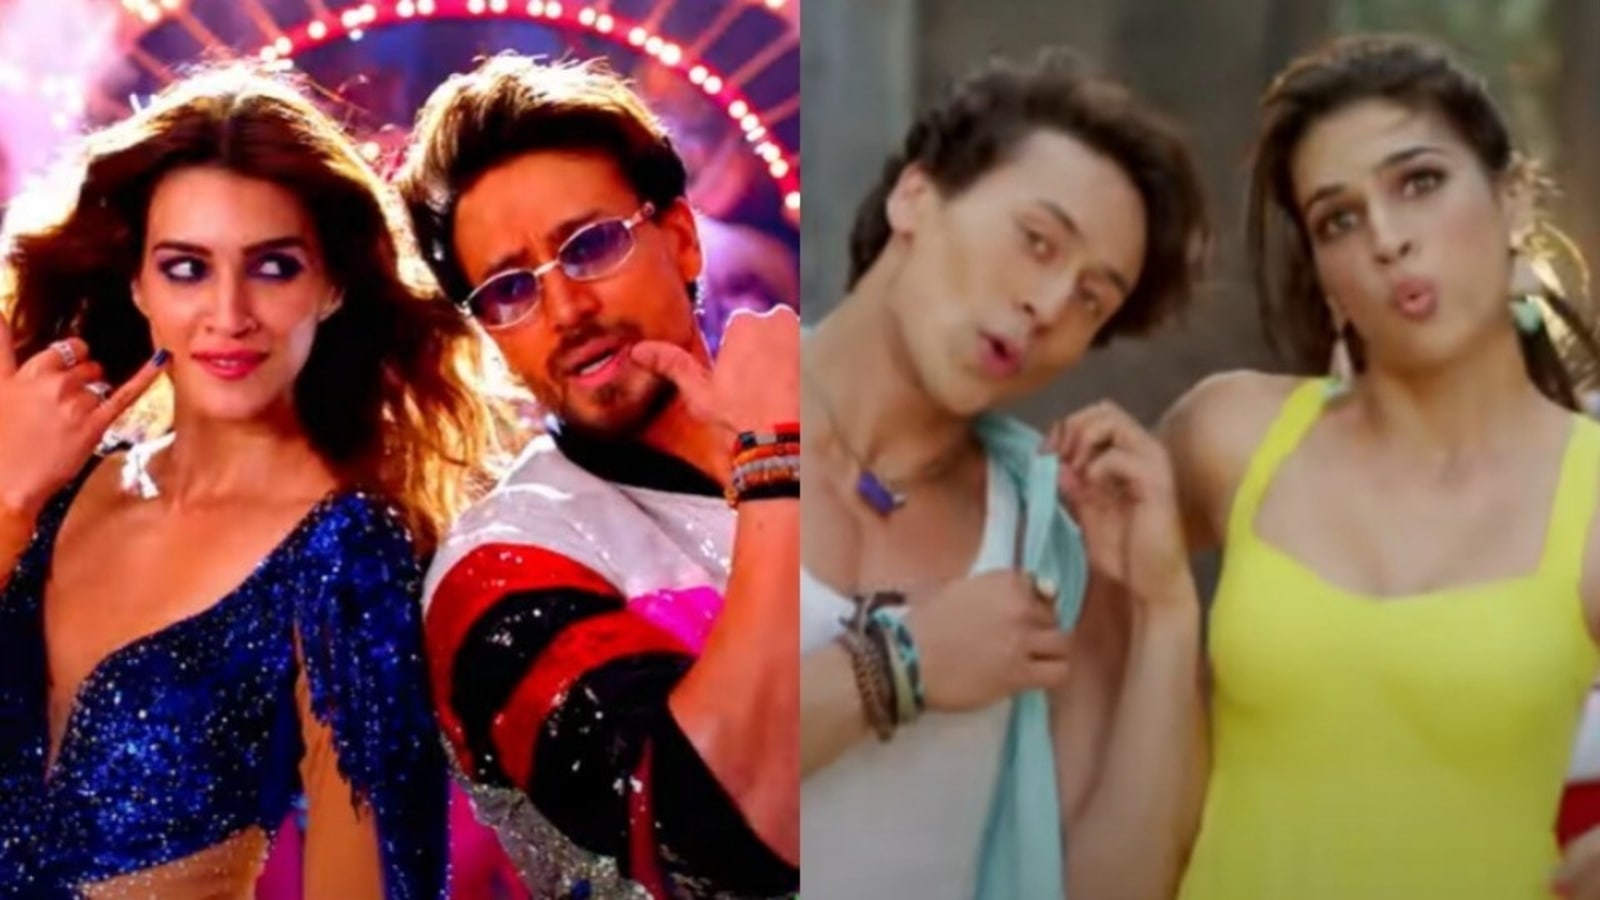 Heropanti 2 song Whistle Baja 2.0: Tiger Shroff, Kriti Sanon reunite after 8 years for a peppy remix; fans get nostalgic